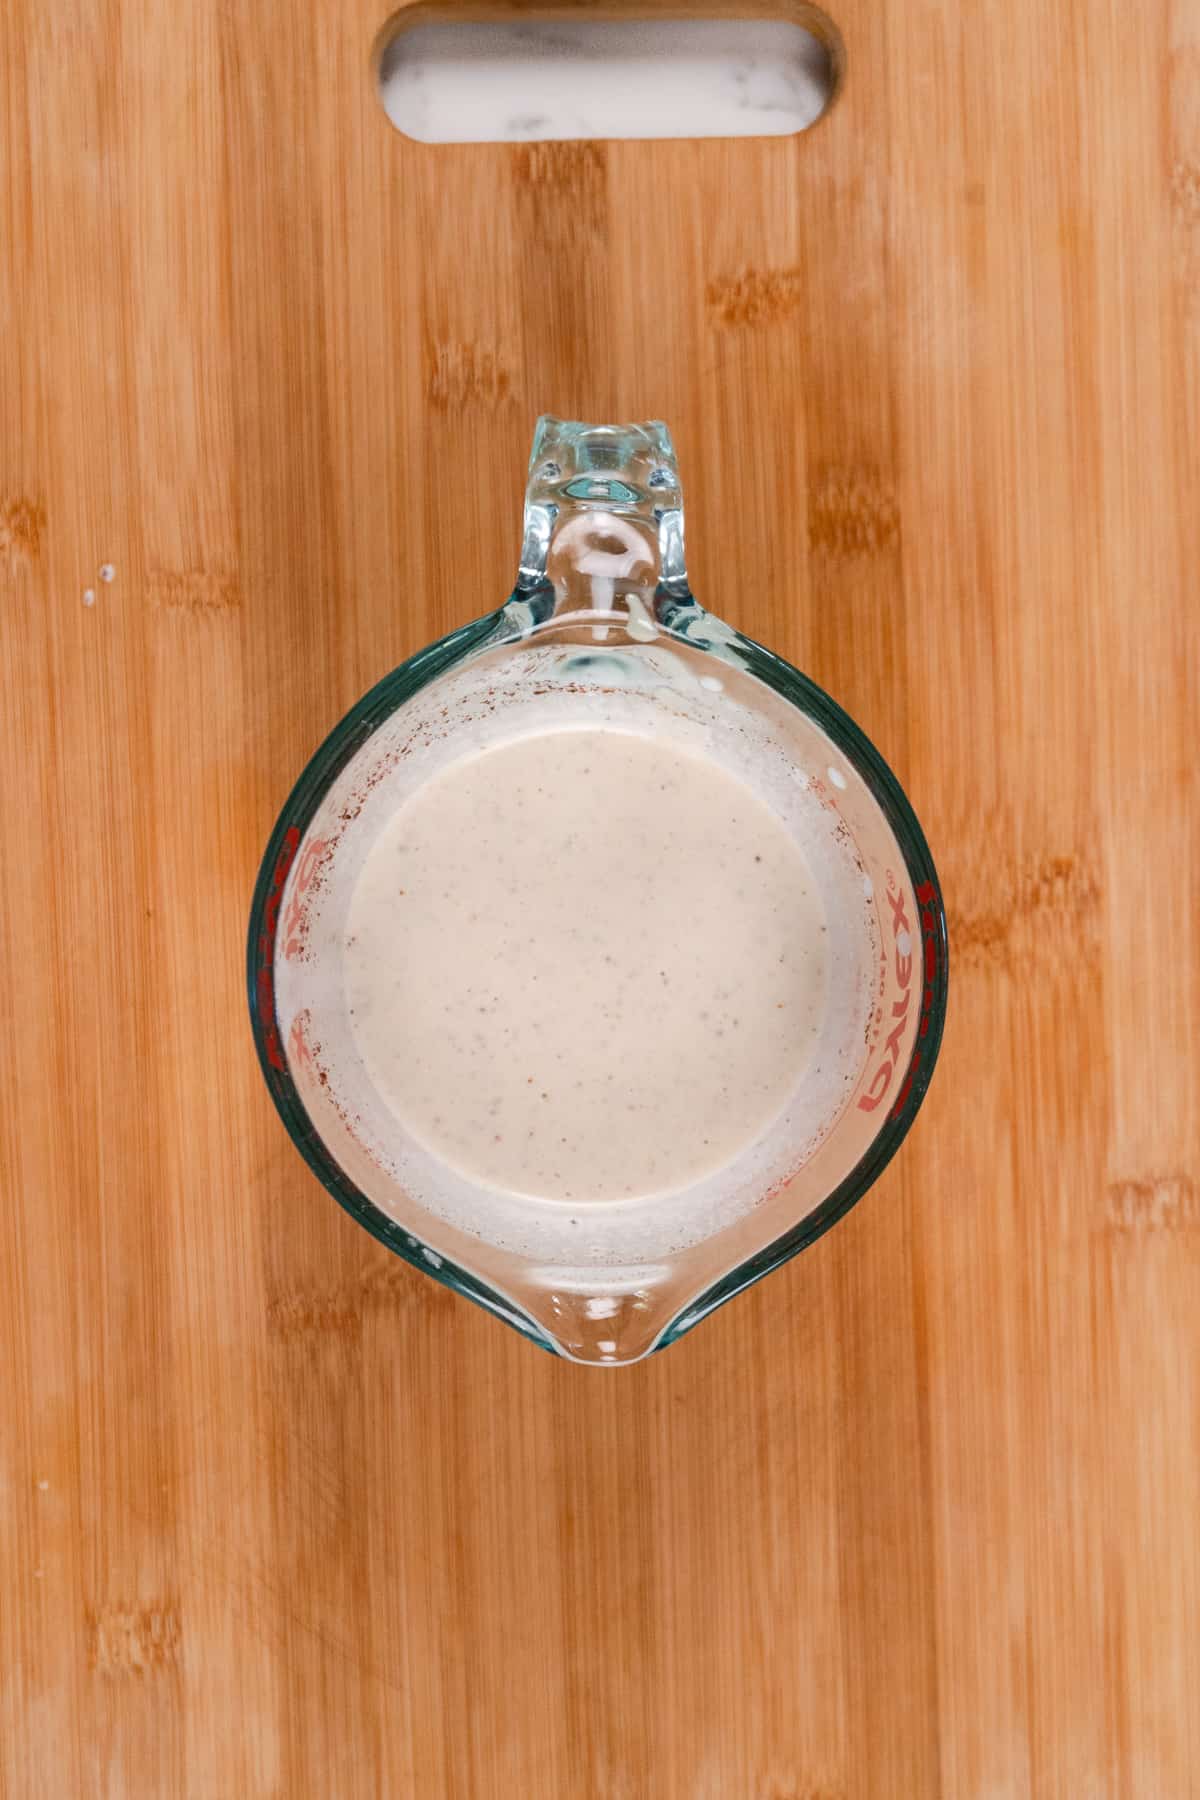 whiteish dressing in a glass jug